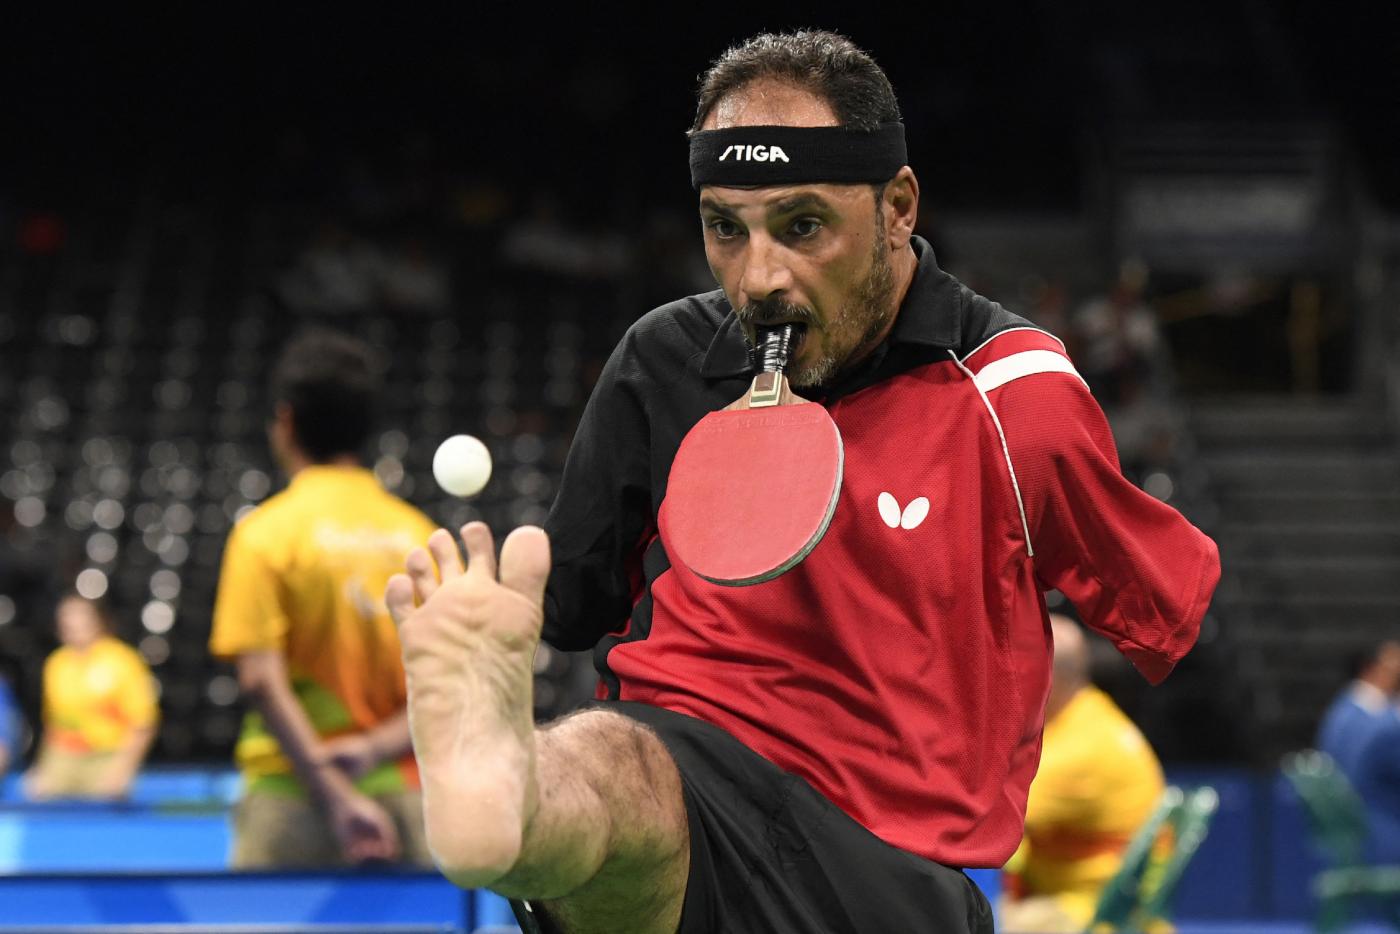 Ibrahim Hamadtou competing in table tennis during the Paralympic Games in Rio de Janeiro, Brazil in 2016 (AFP/Christophe Simon)